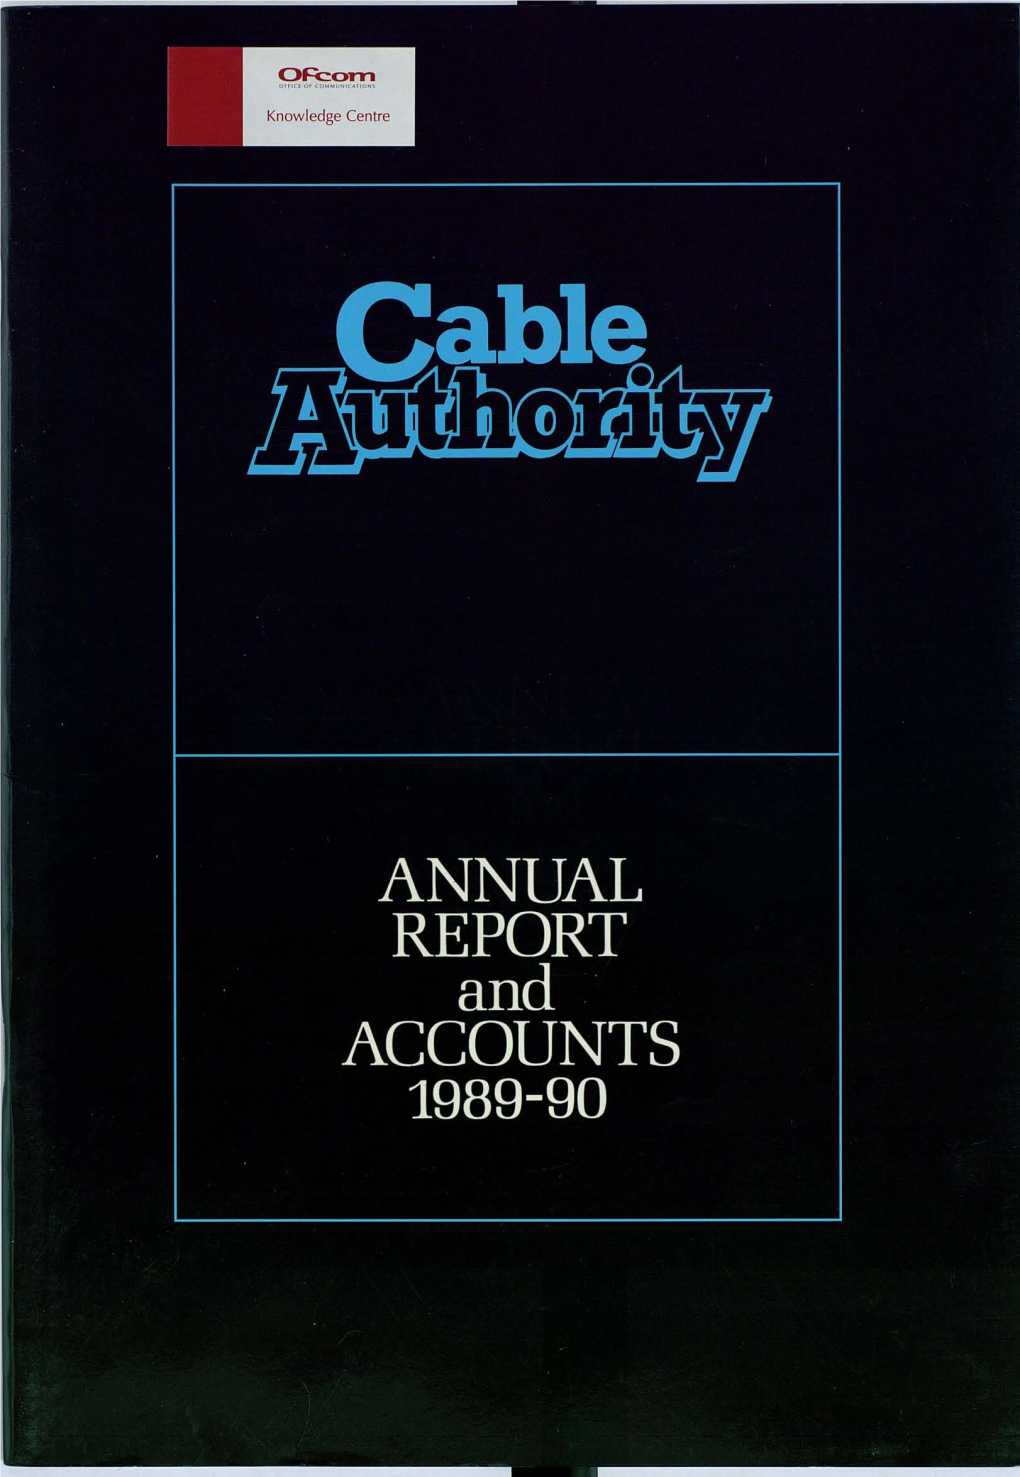 Cable Authority Annual Report and Accounts 1989-90